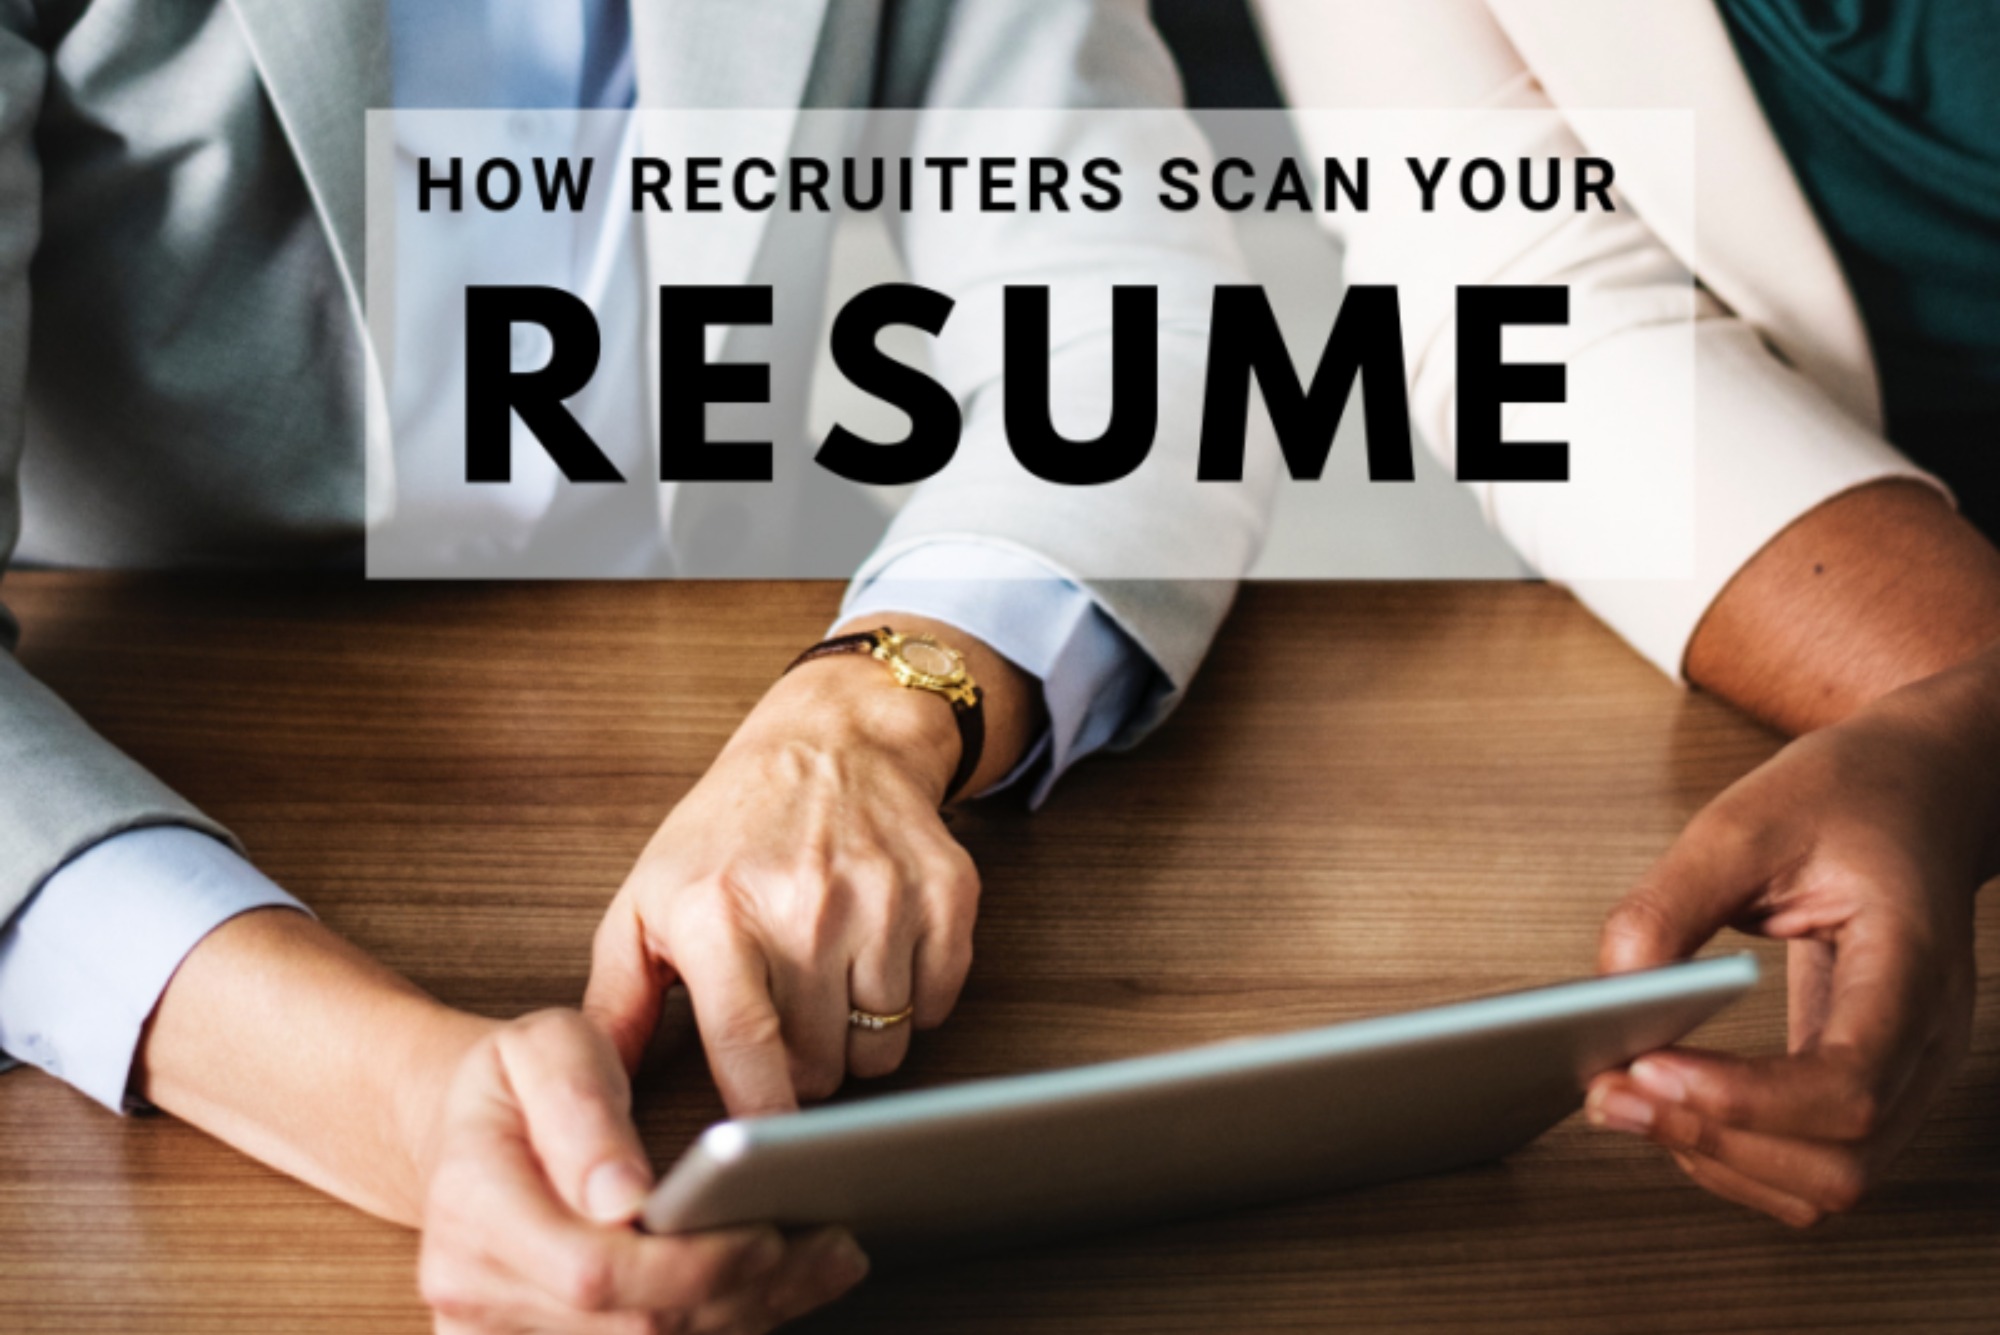 How to Send Resume to Recruitment Agency